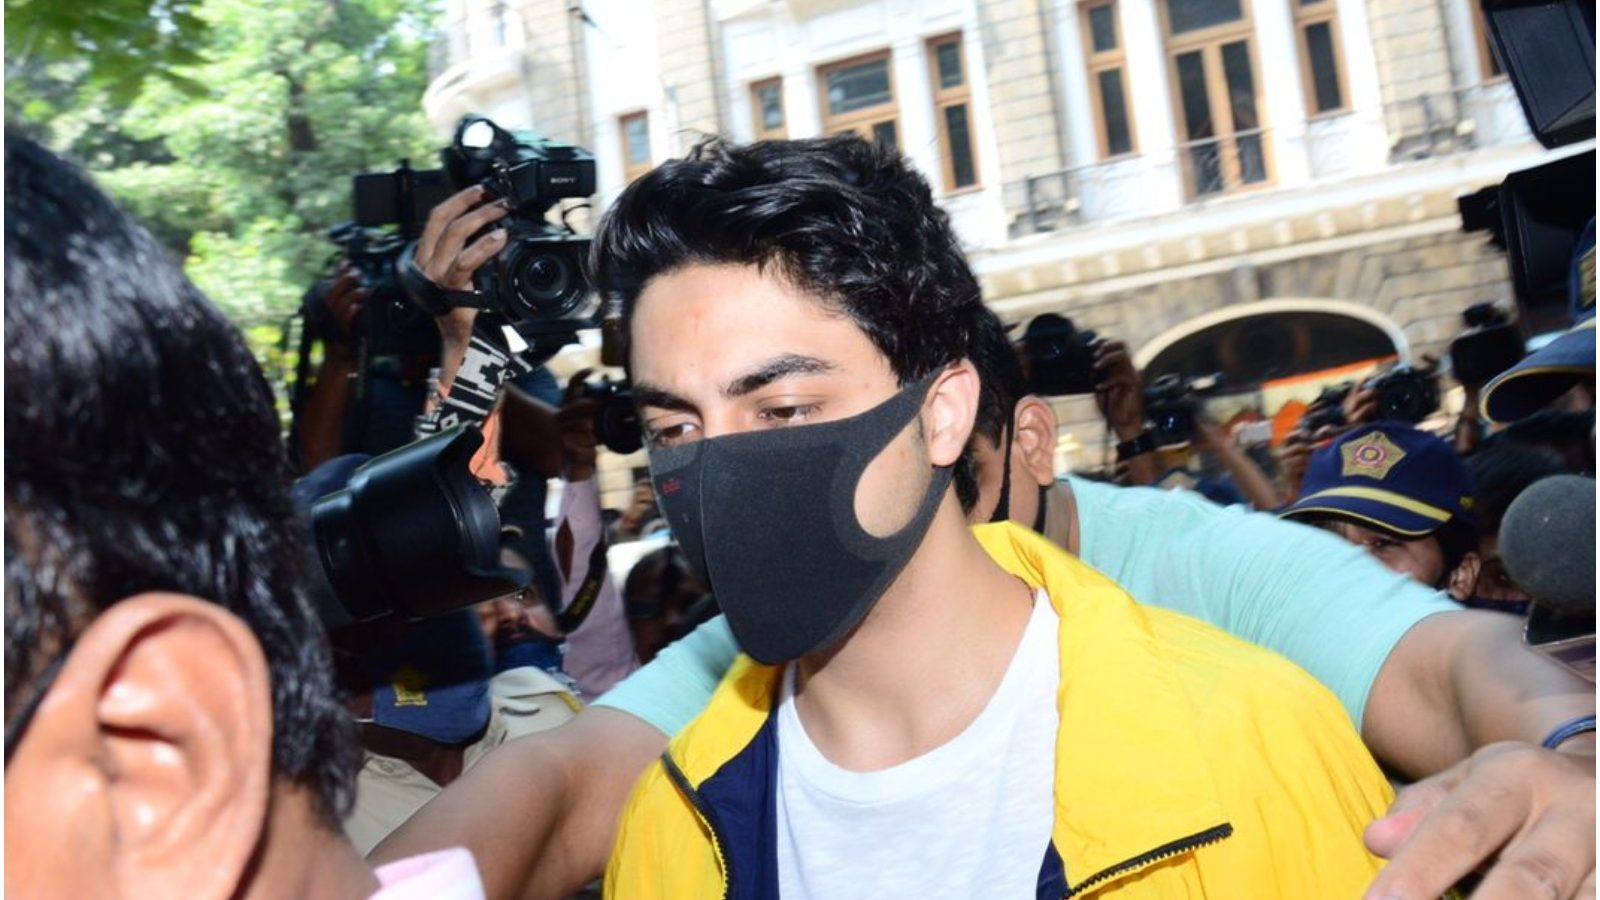 Officer&#39; Keen on Aryan Khan&#39;s Arrest, Probe &#39;Misguided&#39;: Sources Say Delhi  NCB Found &#39;Lapses&#39; in Drugs Case - Flipboard